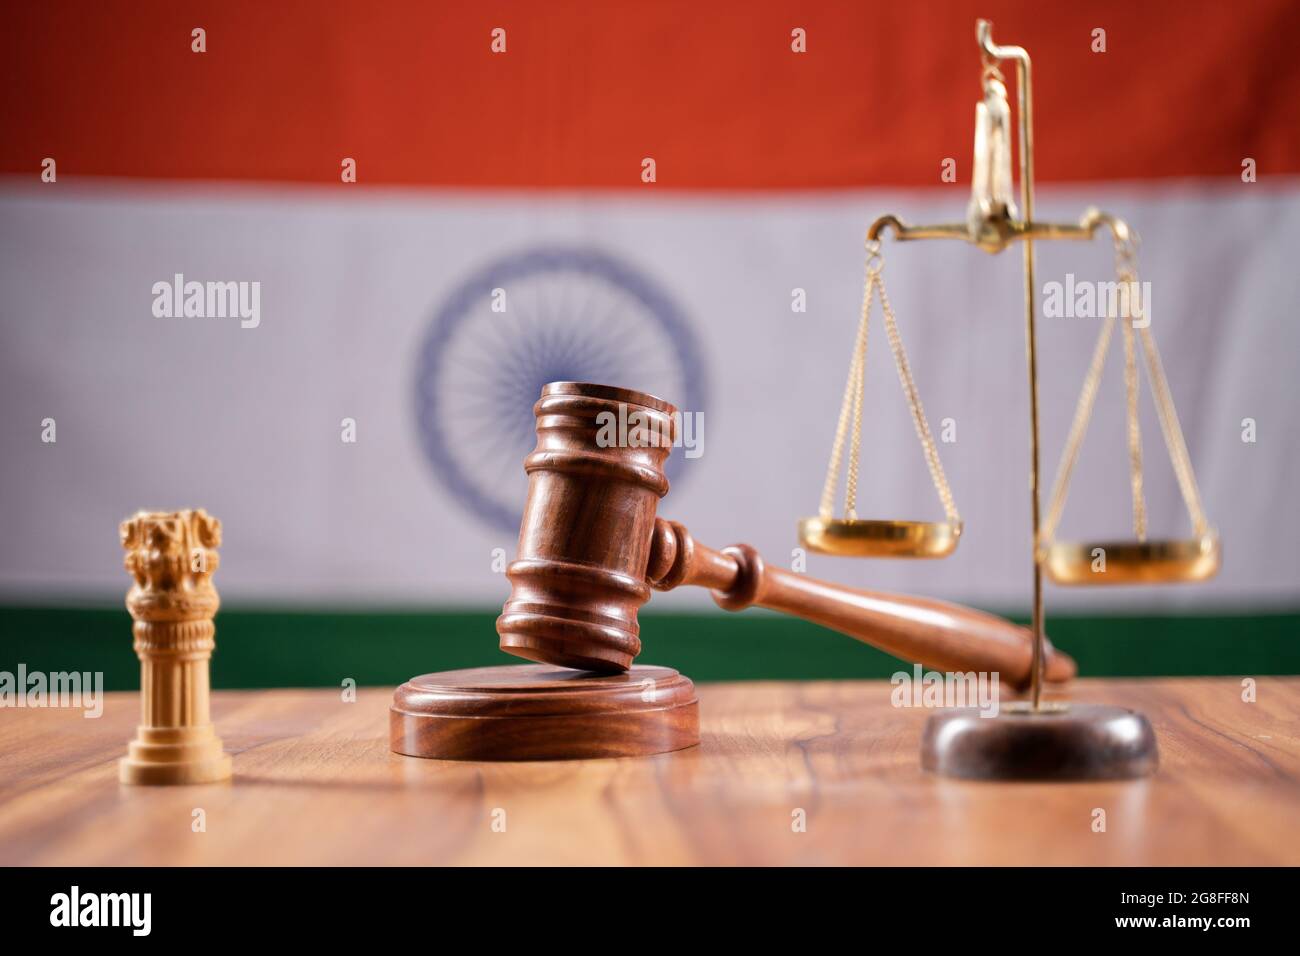 Concept of Indian justice system showing by using Judge Gavel, Balance scale on Indian flag as background Stock Photo